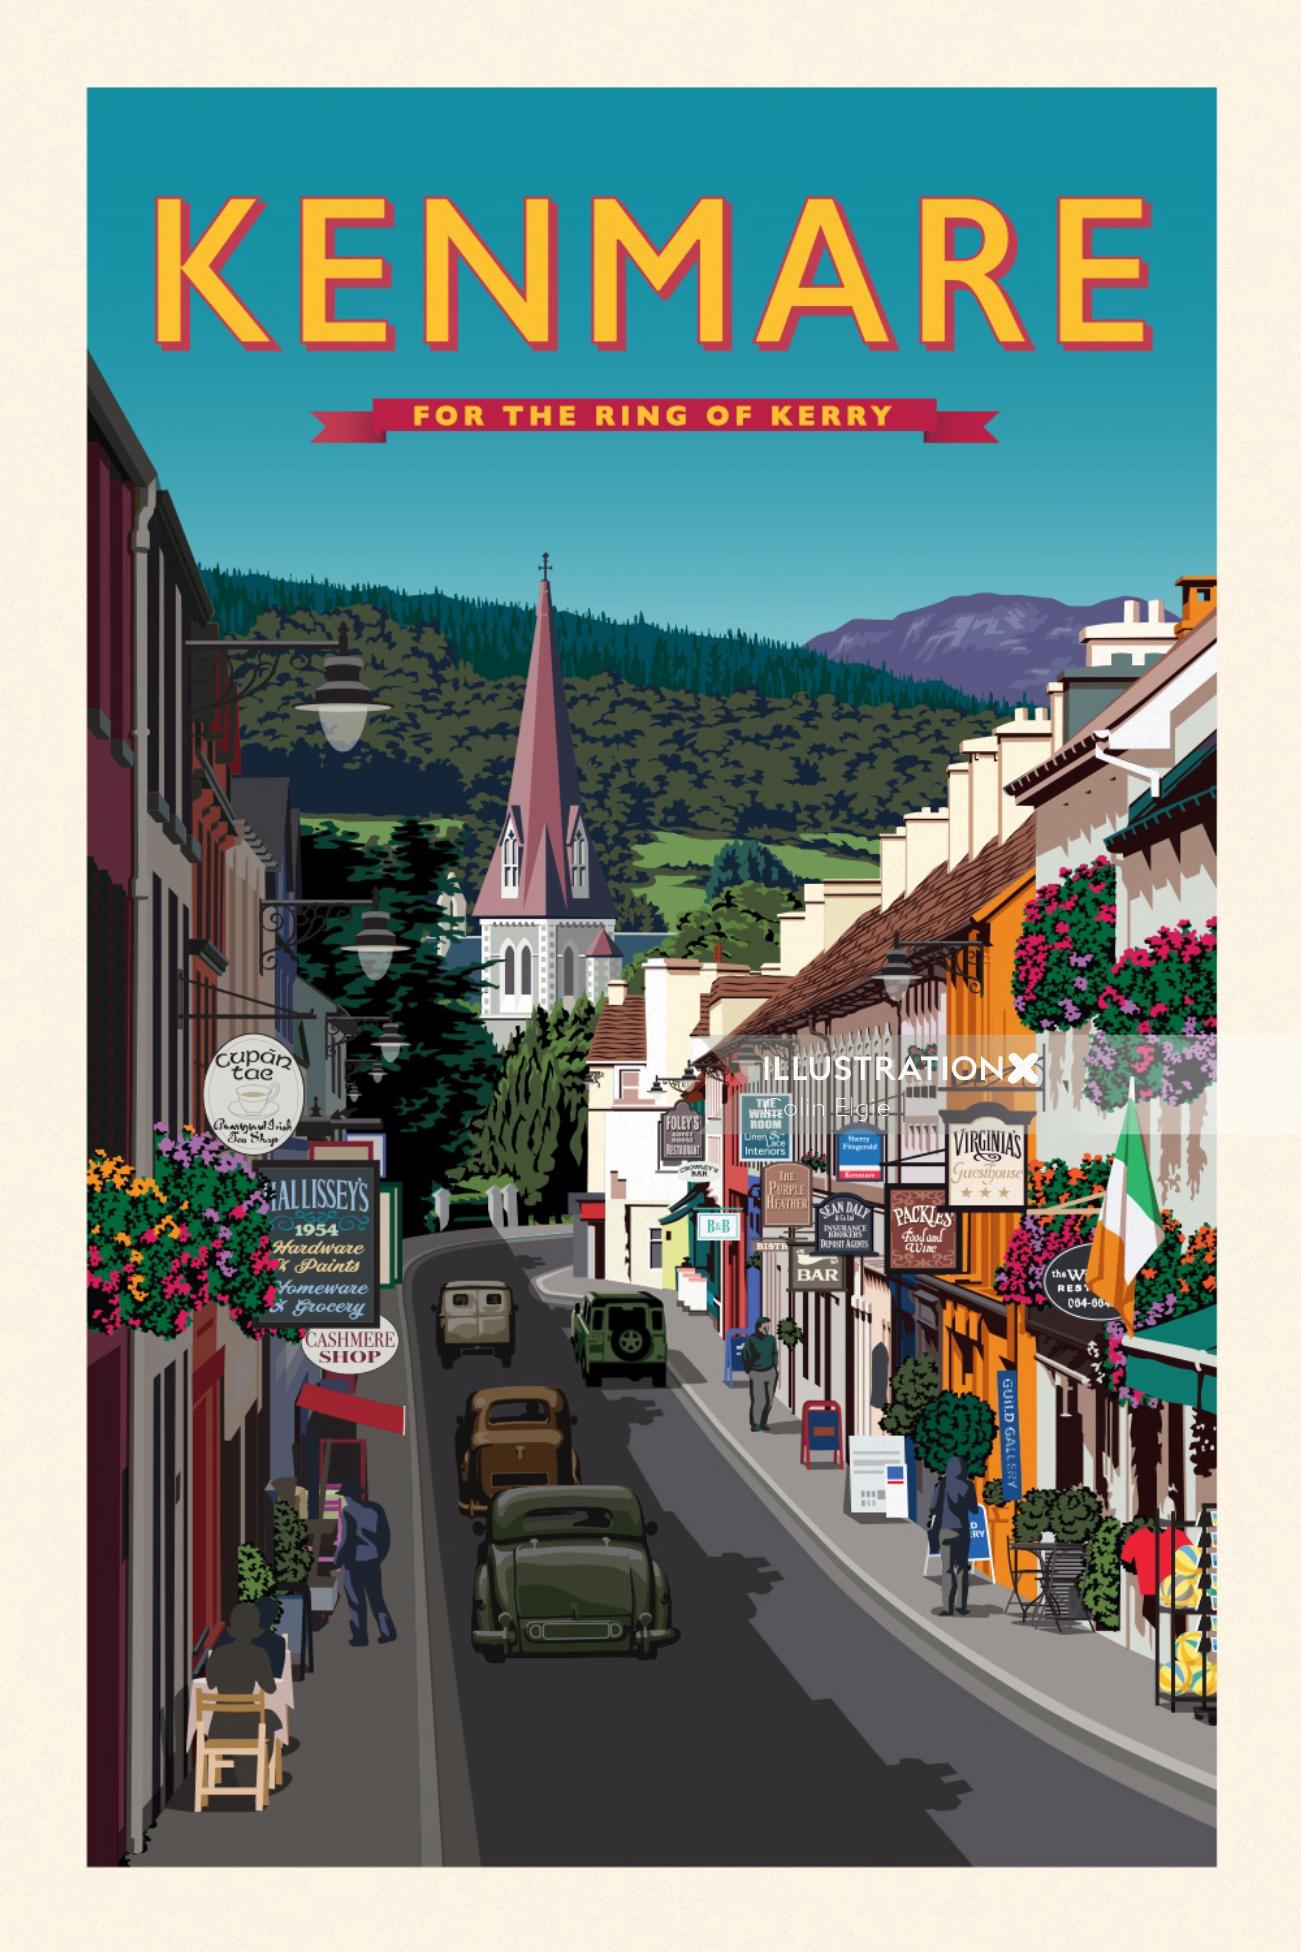 Poster for Kenmare showing a colourful shopping street with old vintage cars on the road.